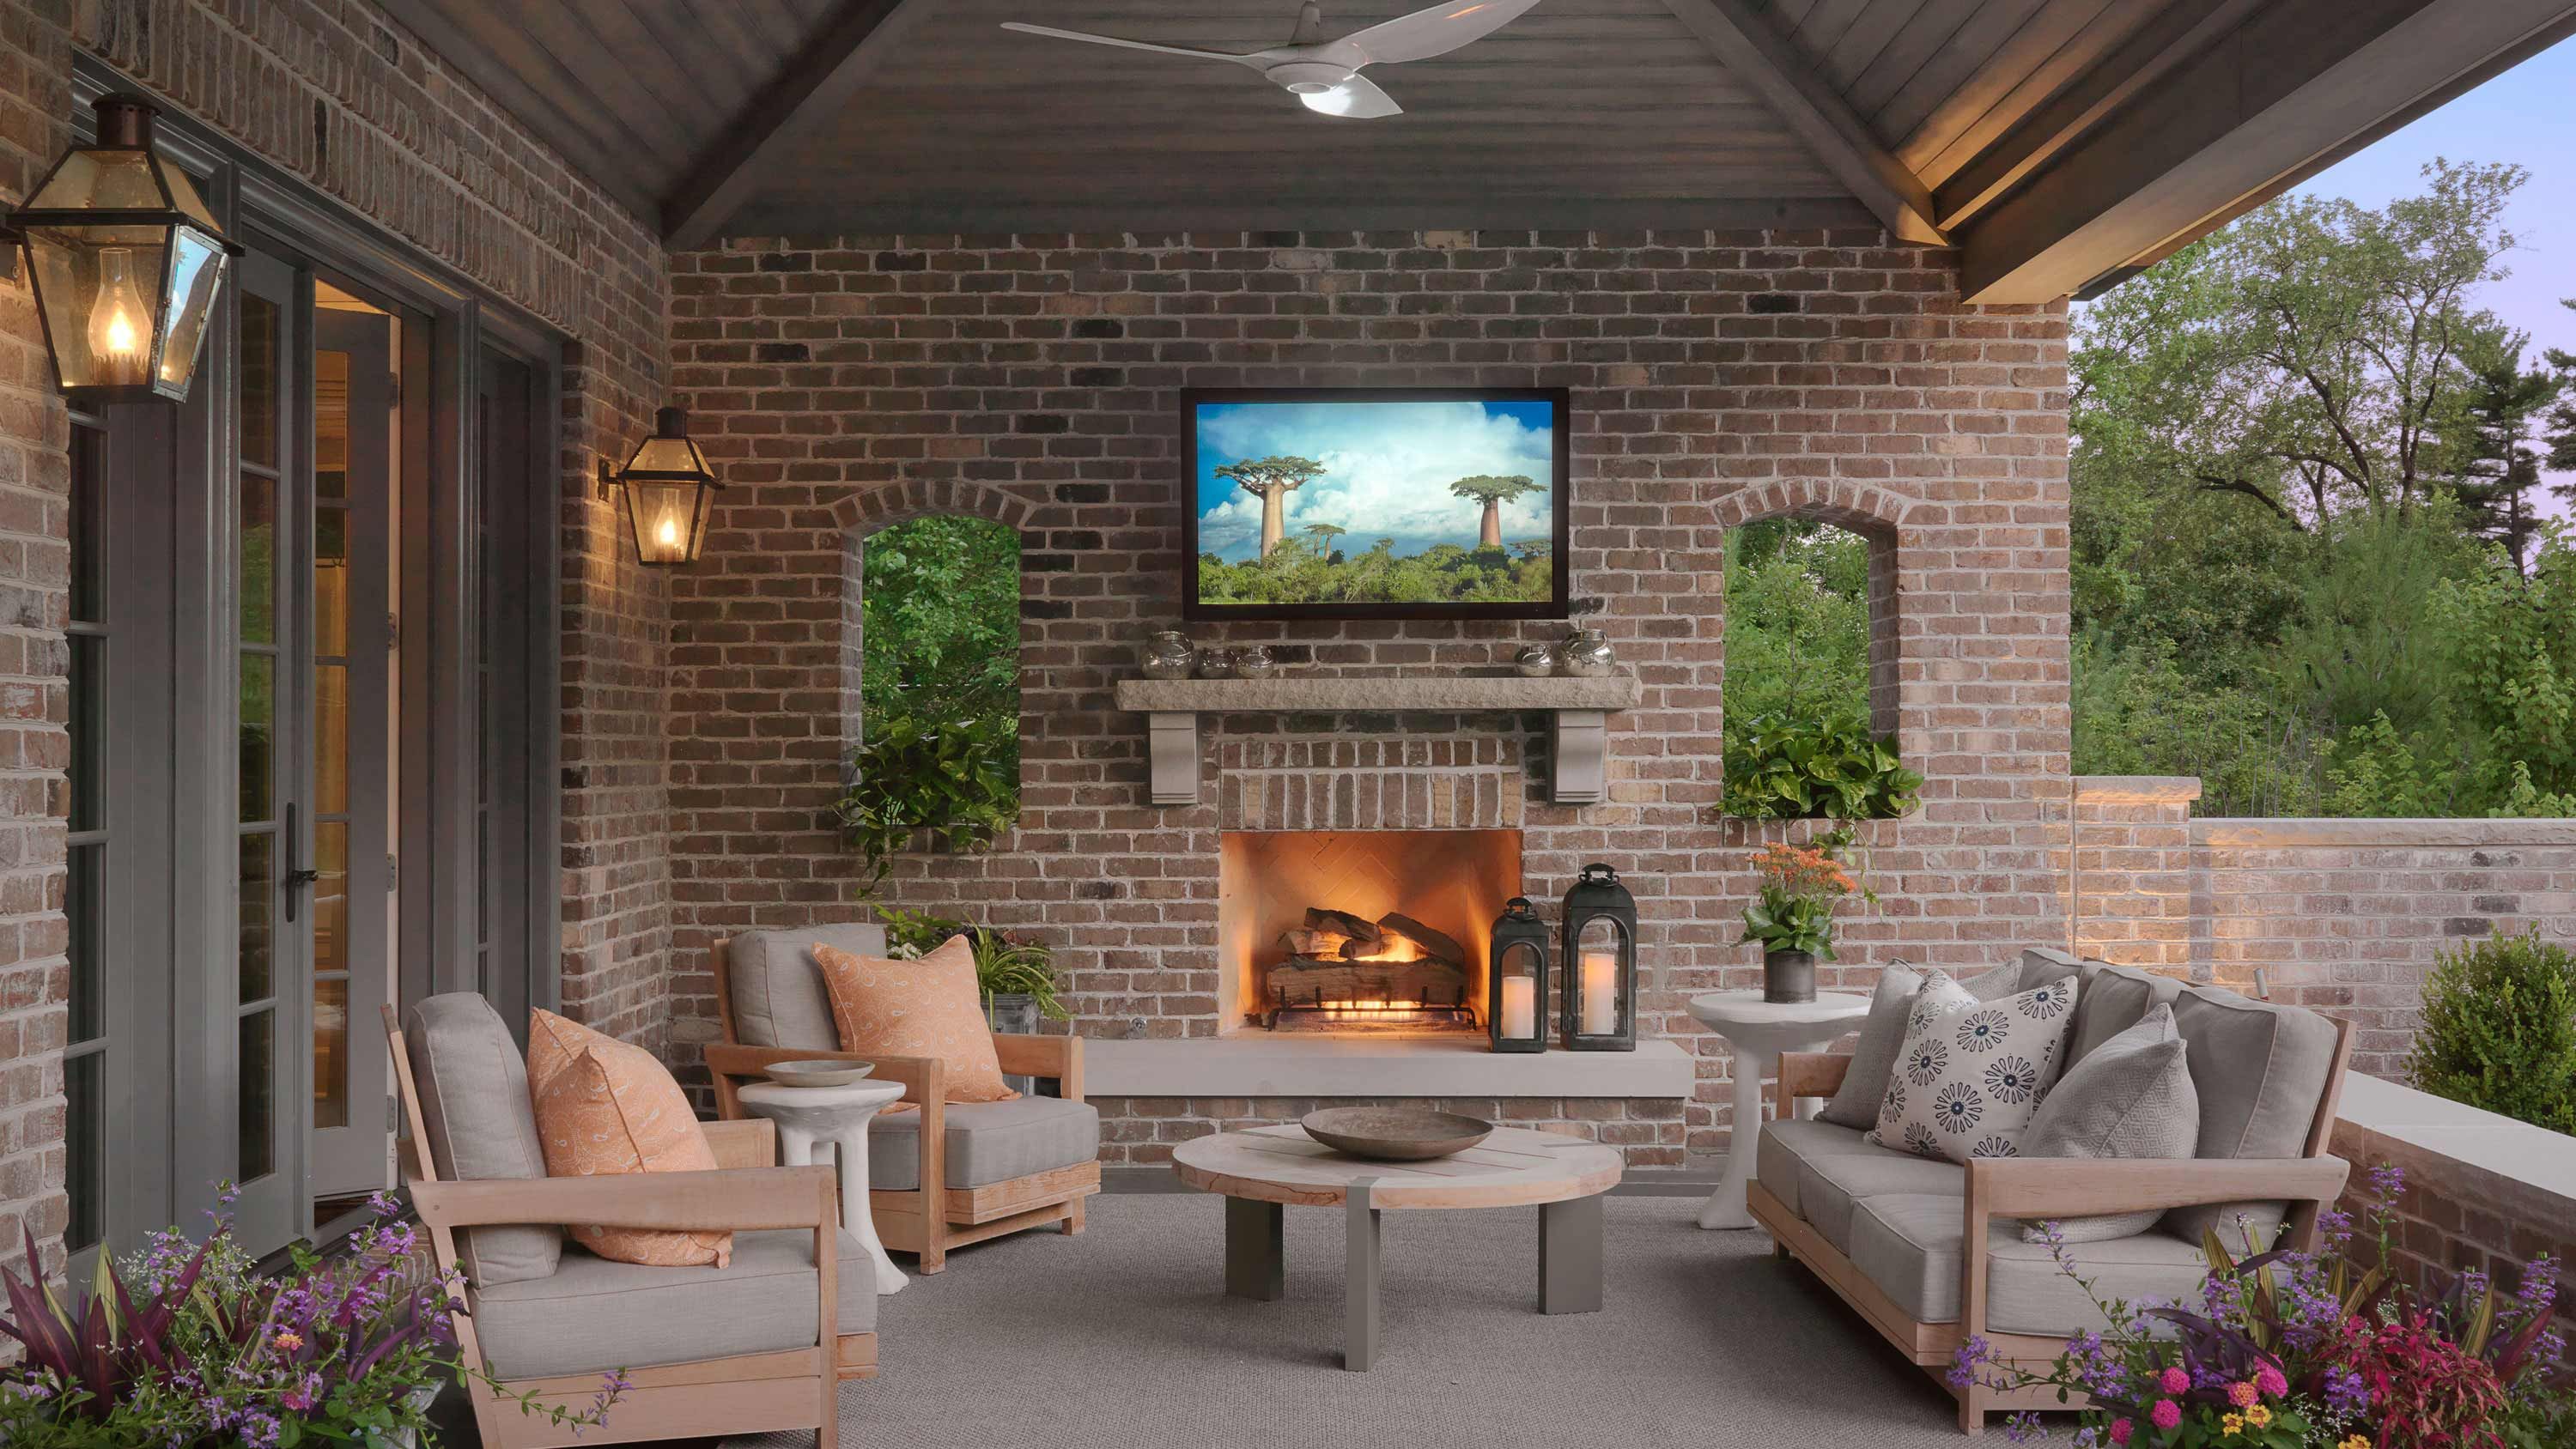 Patio with brick, tv on wall, grey chairs with peach pillows